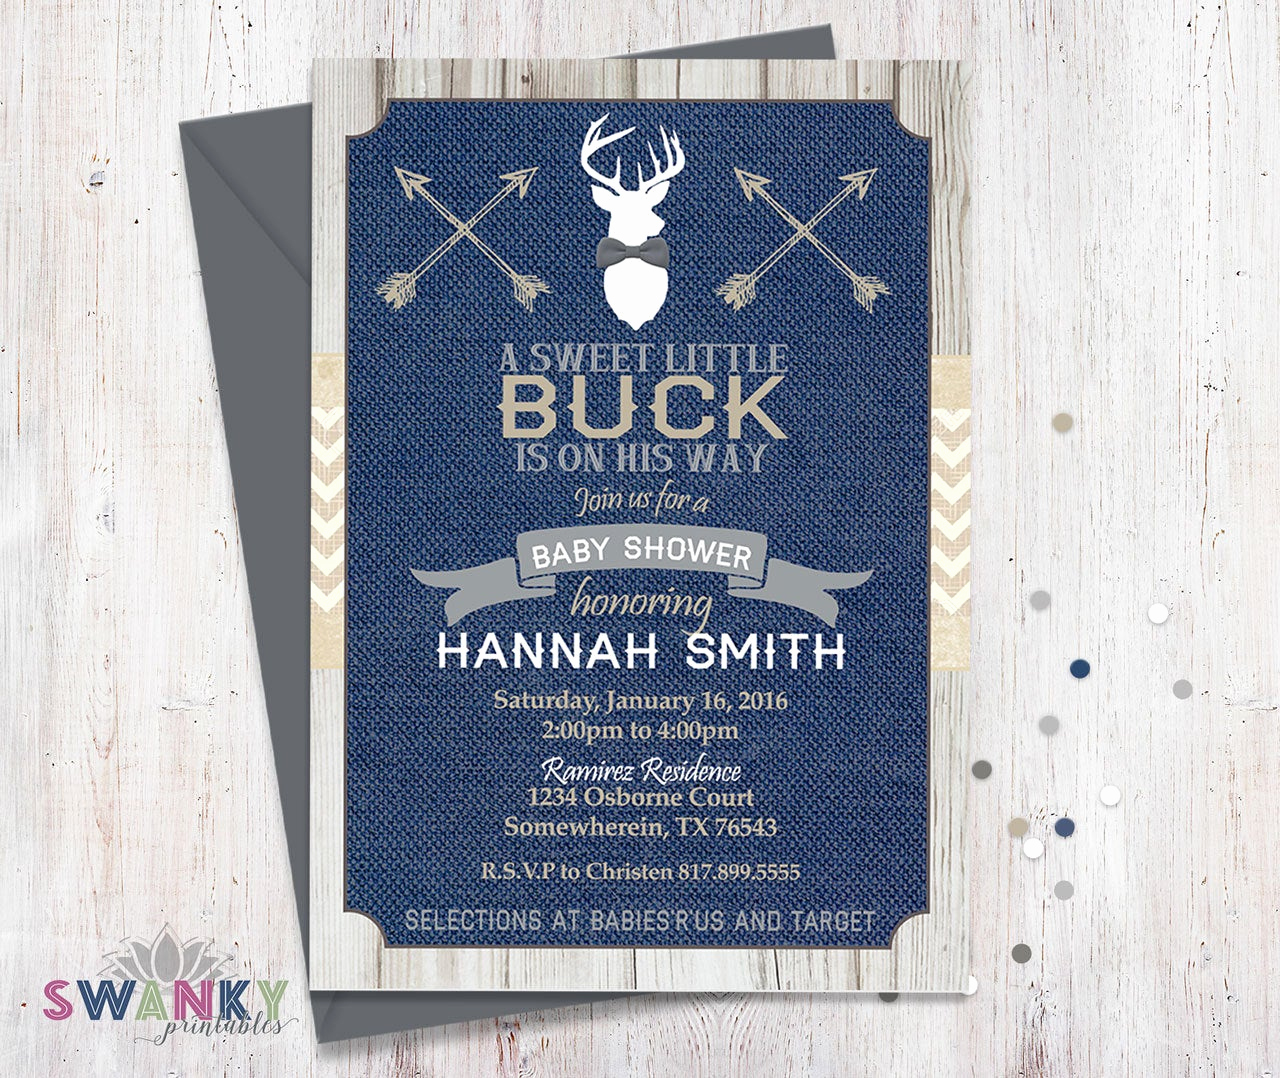 Rustic Baby Shower Invitation Best Of Rustic Deer Baby Shower Invitations Navy and by